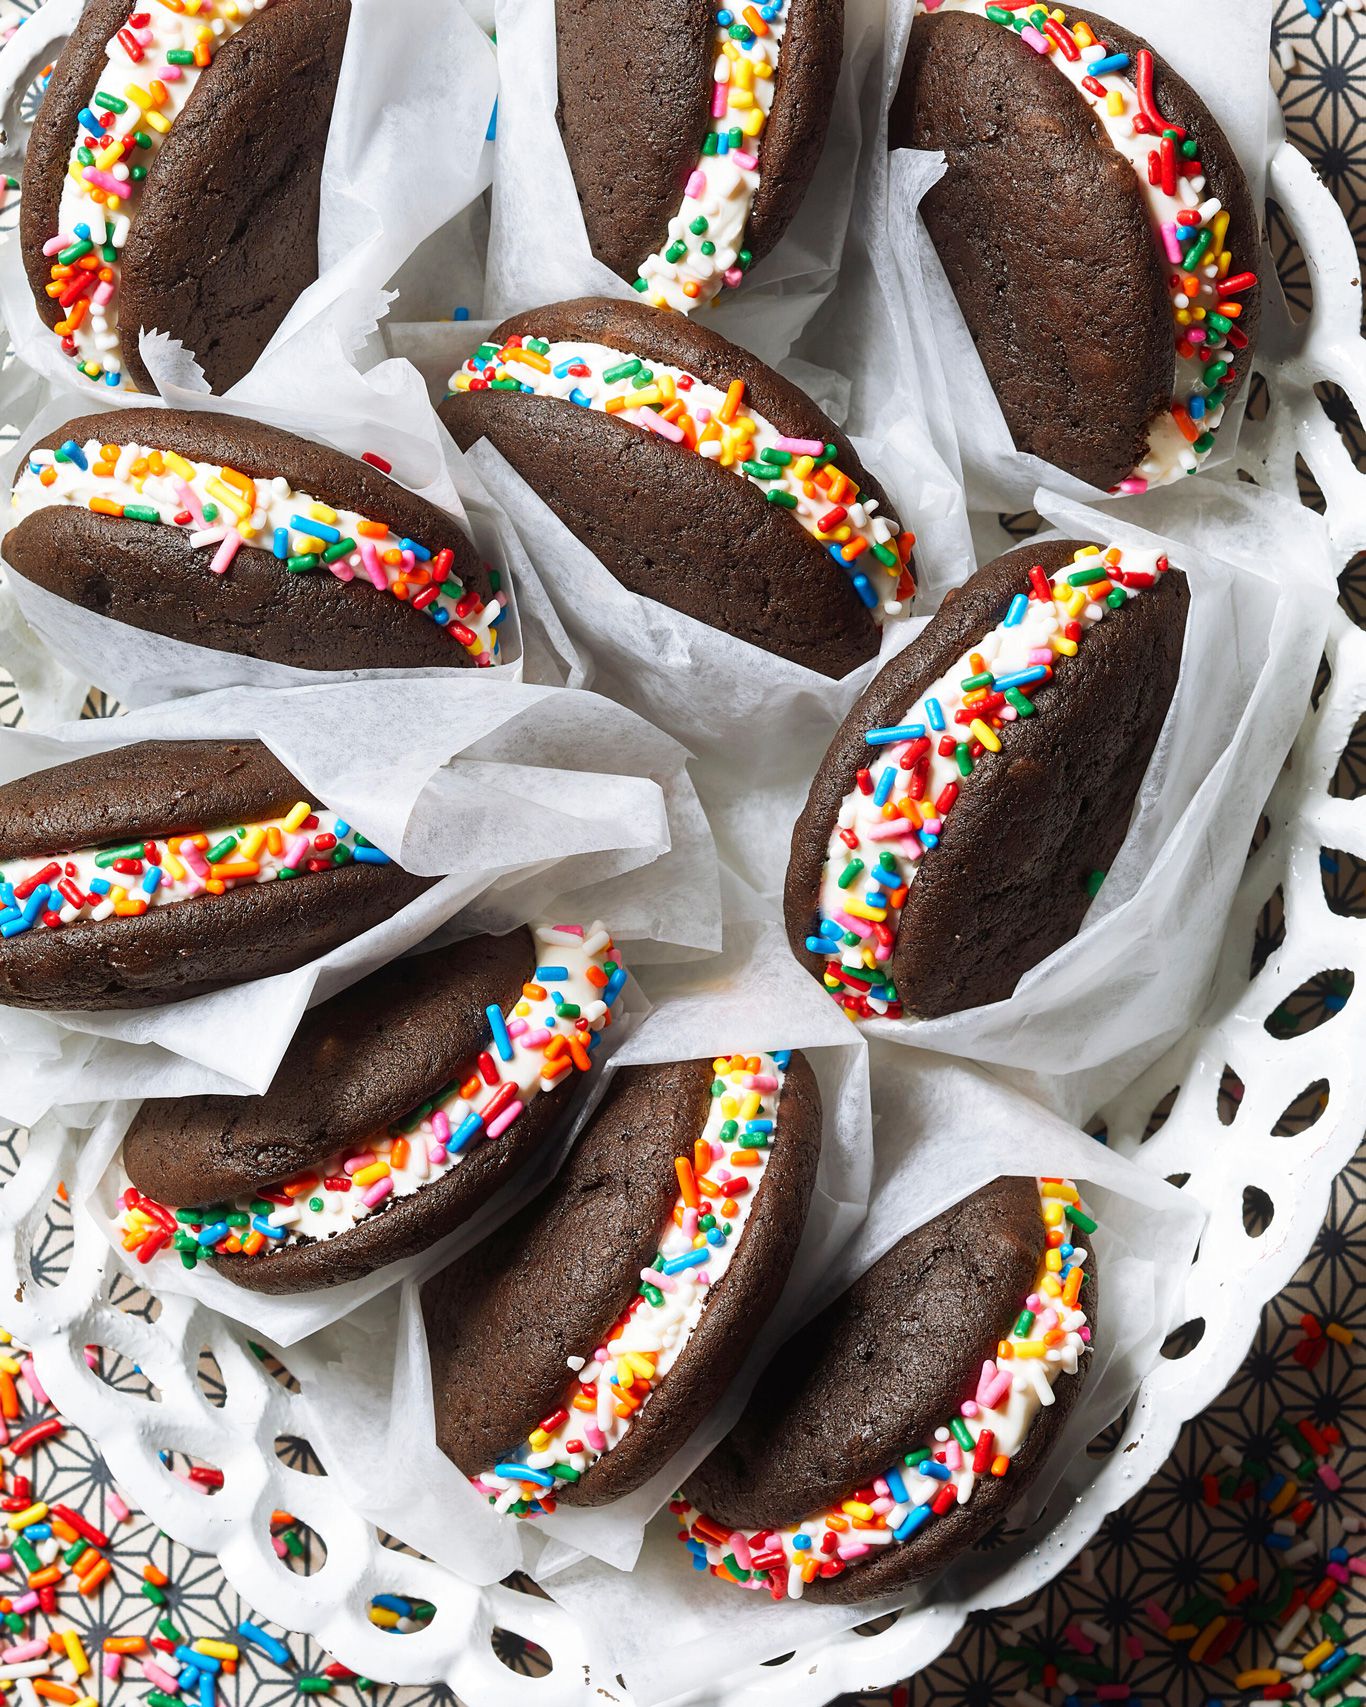 Chocolate whoopie pies with cream filling and coated in rainbow sprinkles